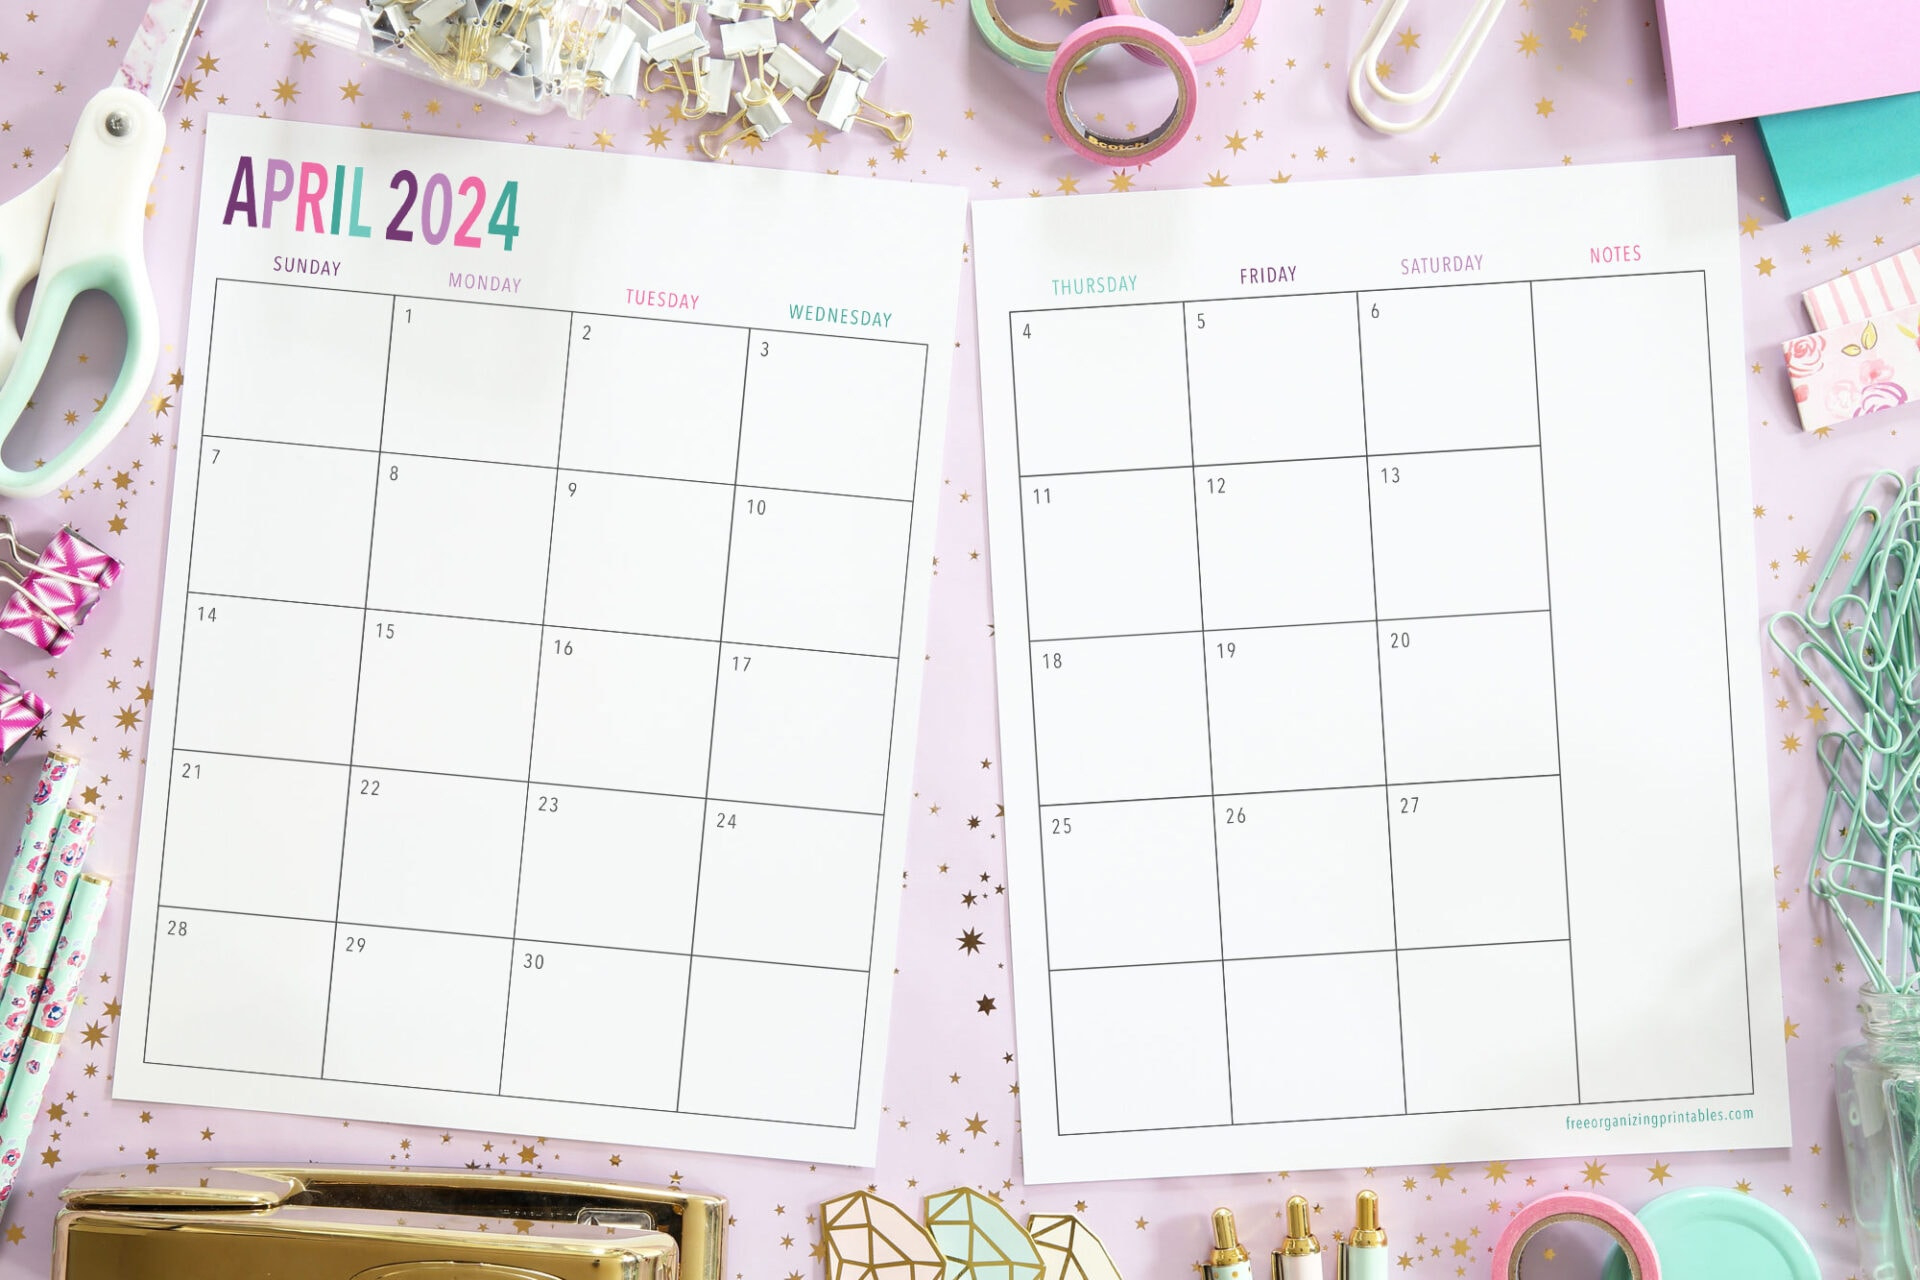 Free Printable 2 Page Blank Monthly Calendar 2024 inside Free Printable Calendar 2024 2 Pages Per Month